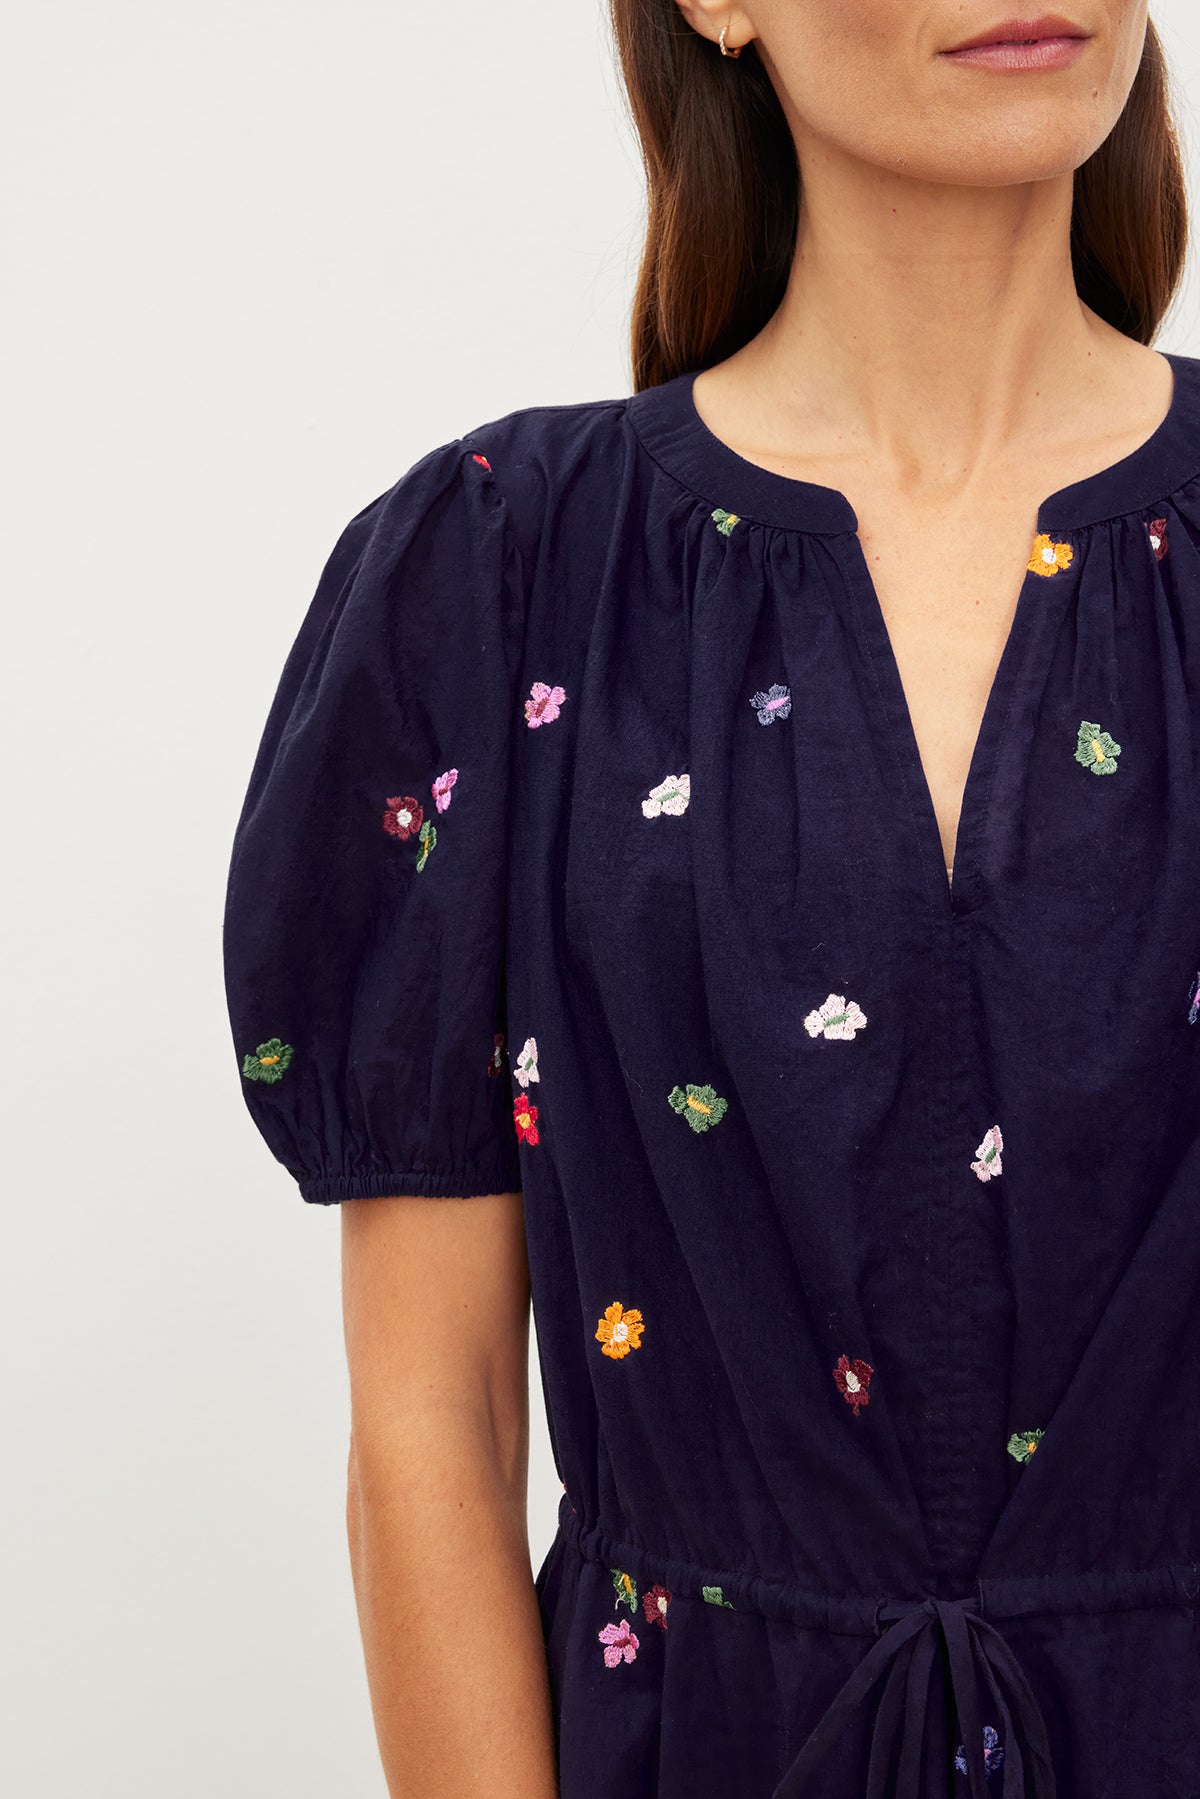 A woman in a navy Velvet by Graham & Spencer dress with colorful floral embroidery on the sleeves, chest, and a v-neckline stands against a neutral background. Only her torso and one shoulder are visible.-35955576471745